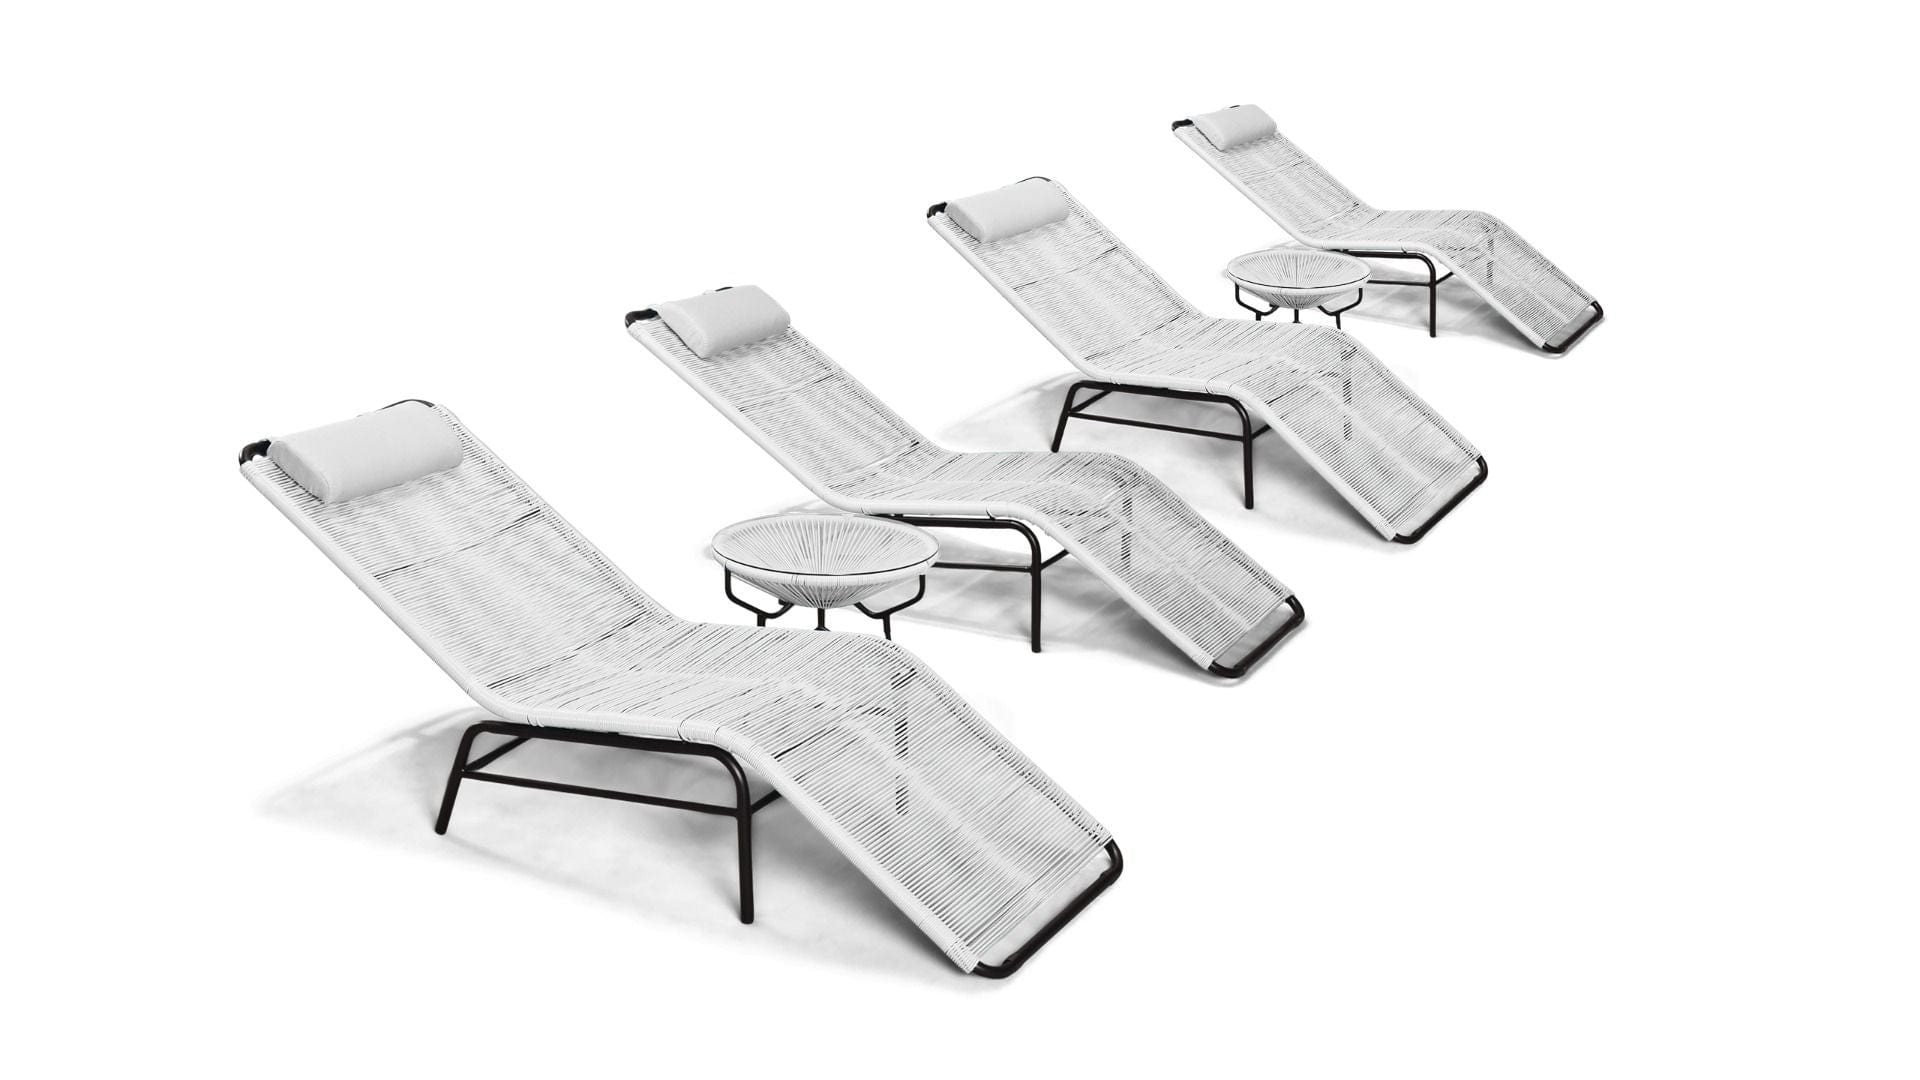 Harmonia Living Chaise Lounge White Lightning Harmonia Living - Acapulco 6 Piece Chaise Lounge Set - Two Table and Four Chaise Lounges | HL-ACA-6CLS